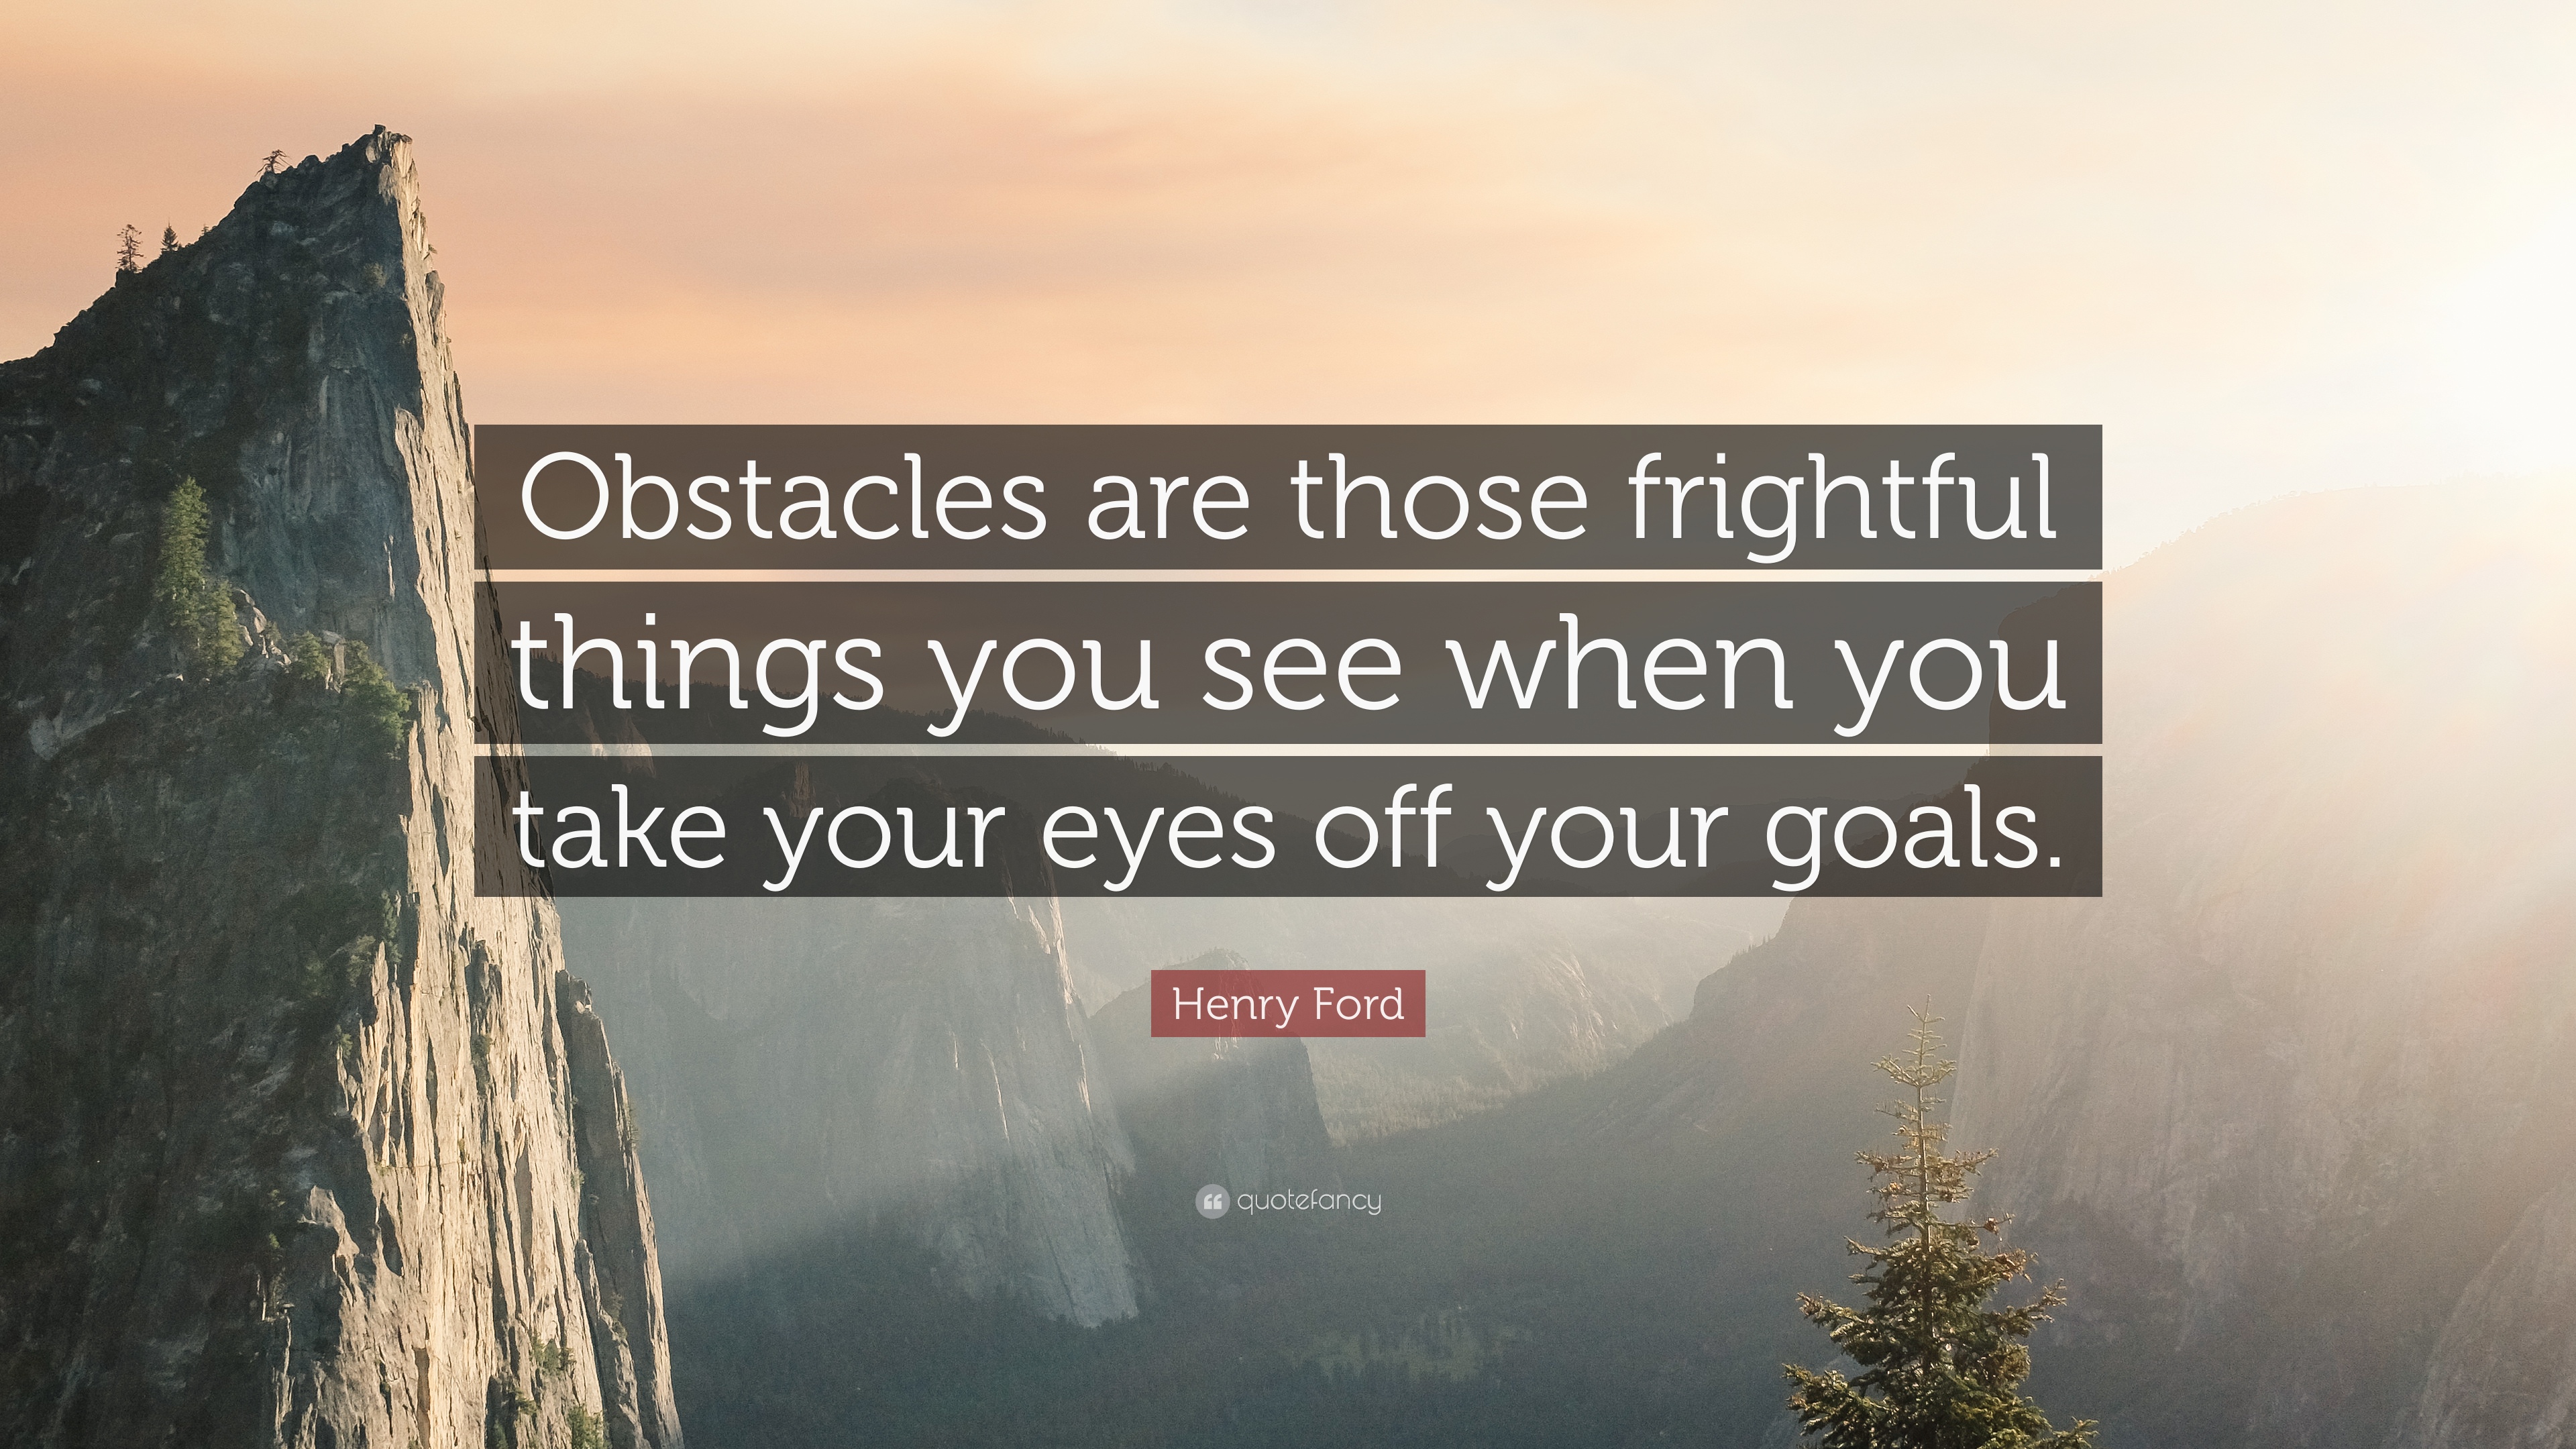 4872-Henry-Ford-Quote-Obstacles-are-those-frightful-things-you-see-when.jpg